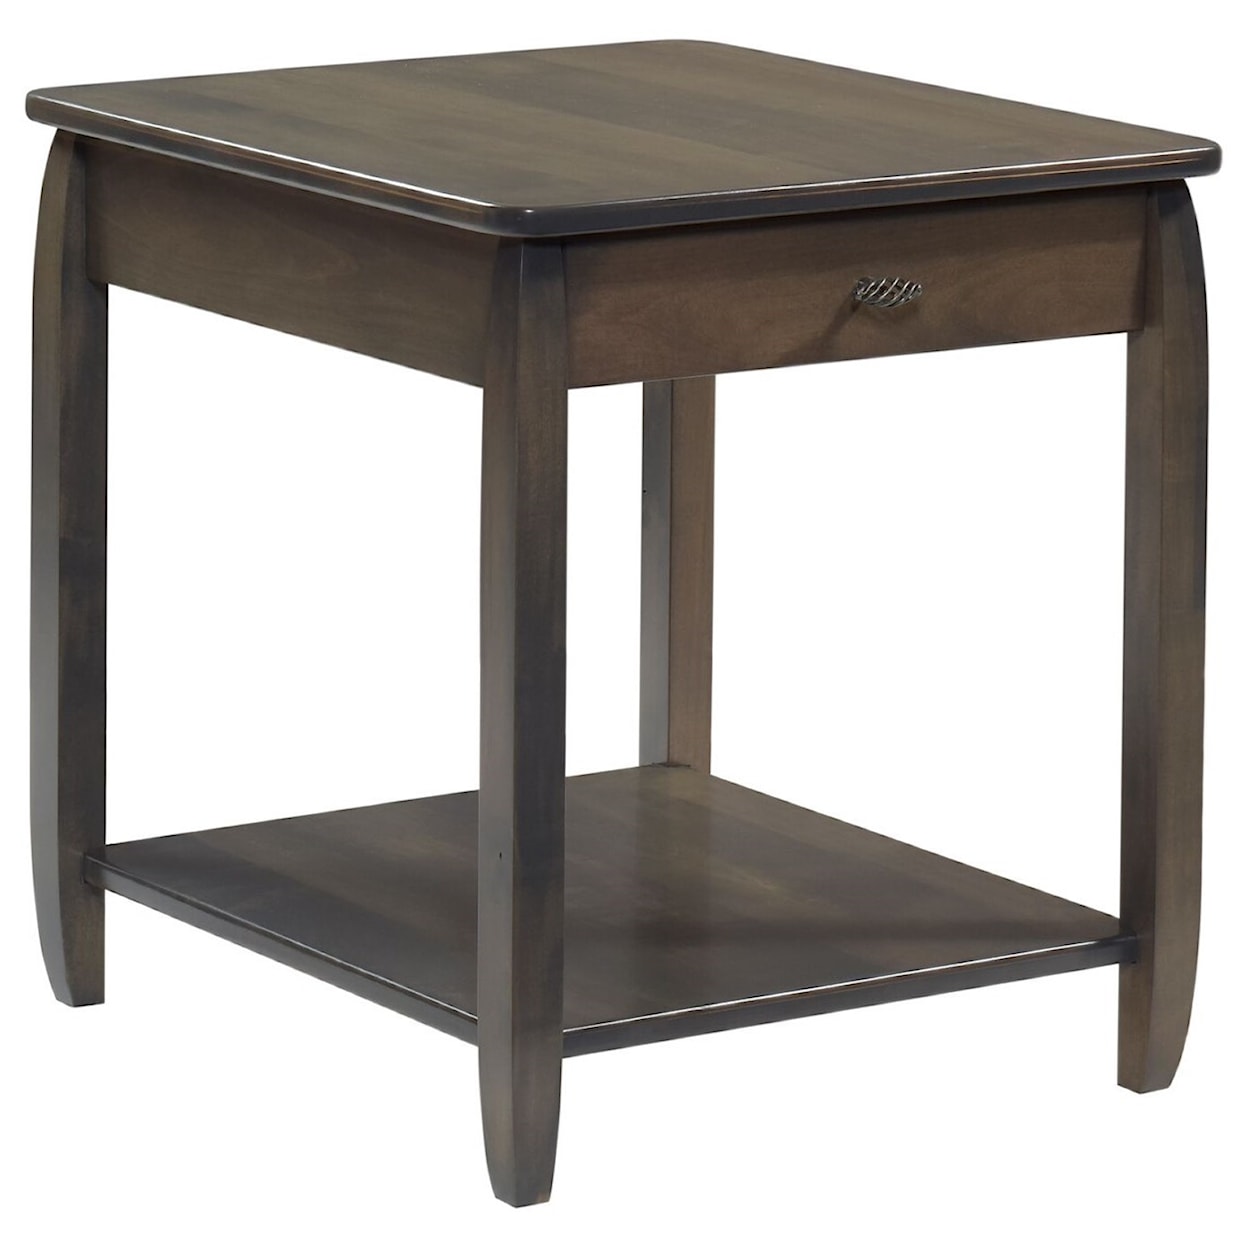 Y & T Woodcraft Apache End Table